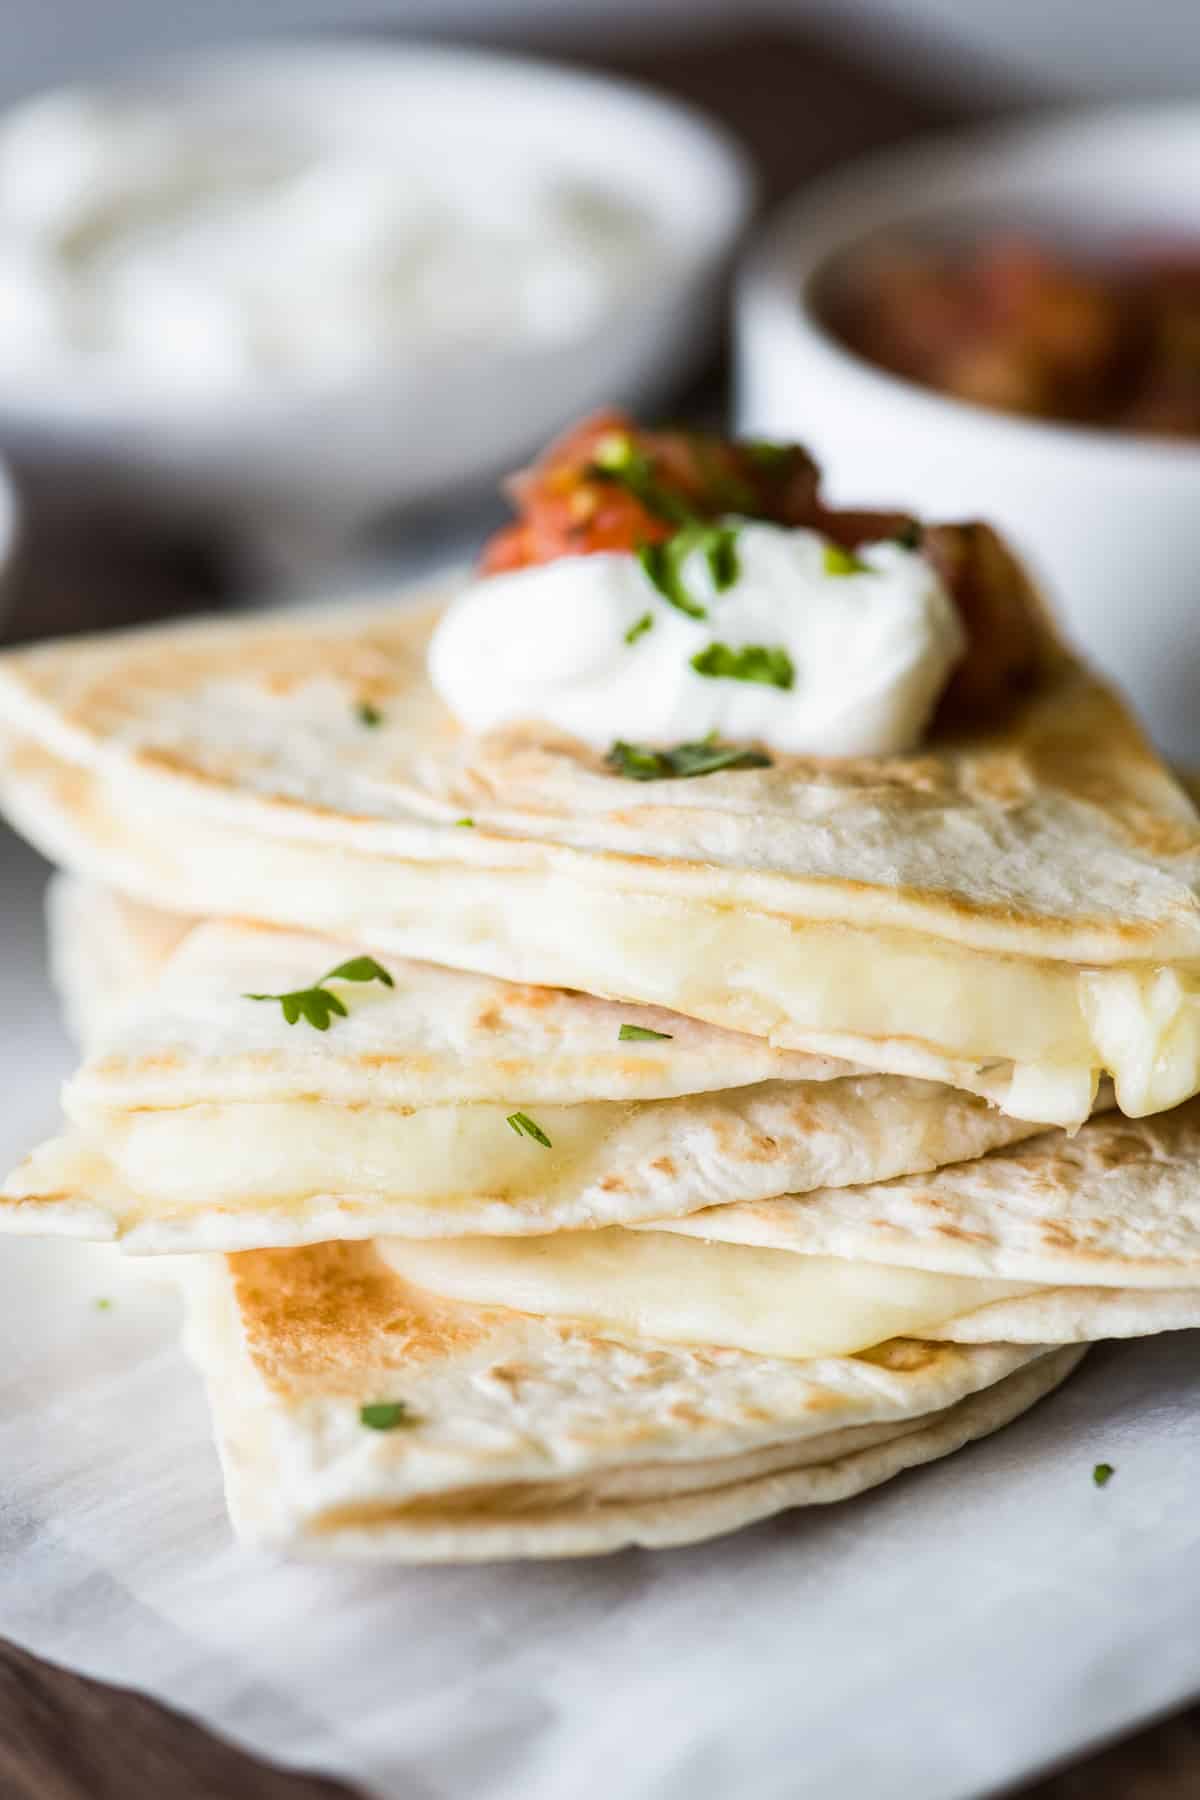 Cheese quesadillas with melted cheese in flour tortillas.